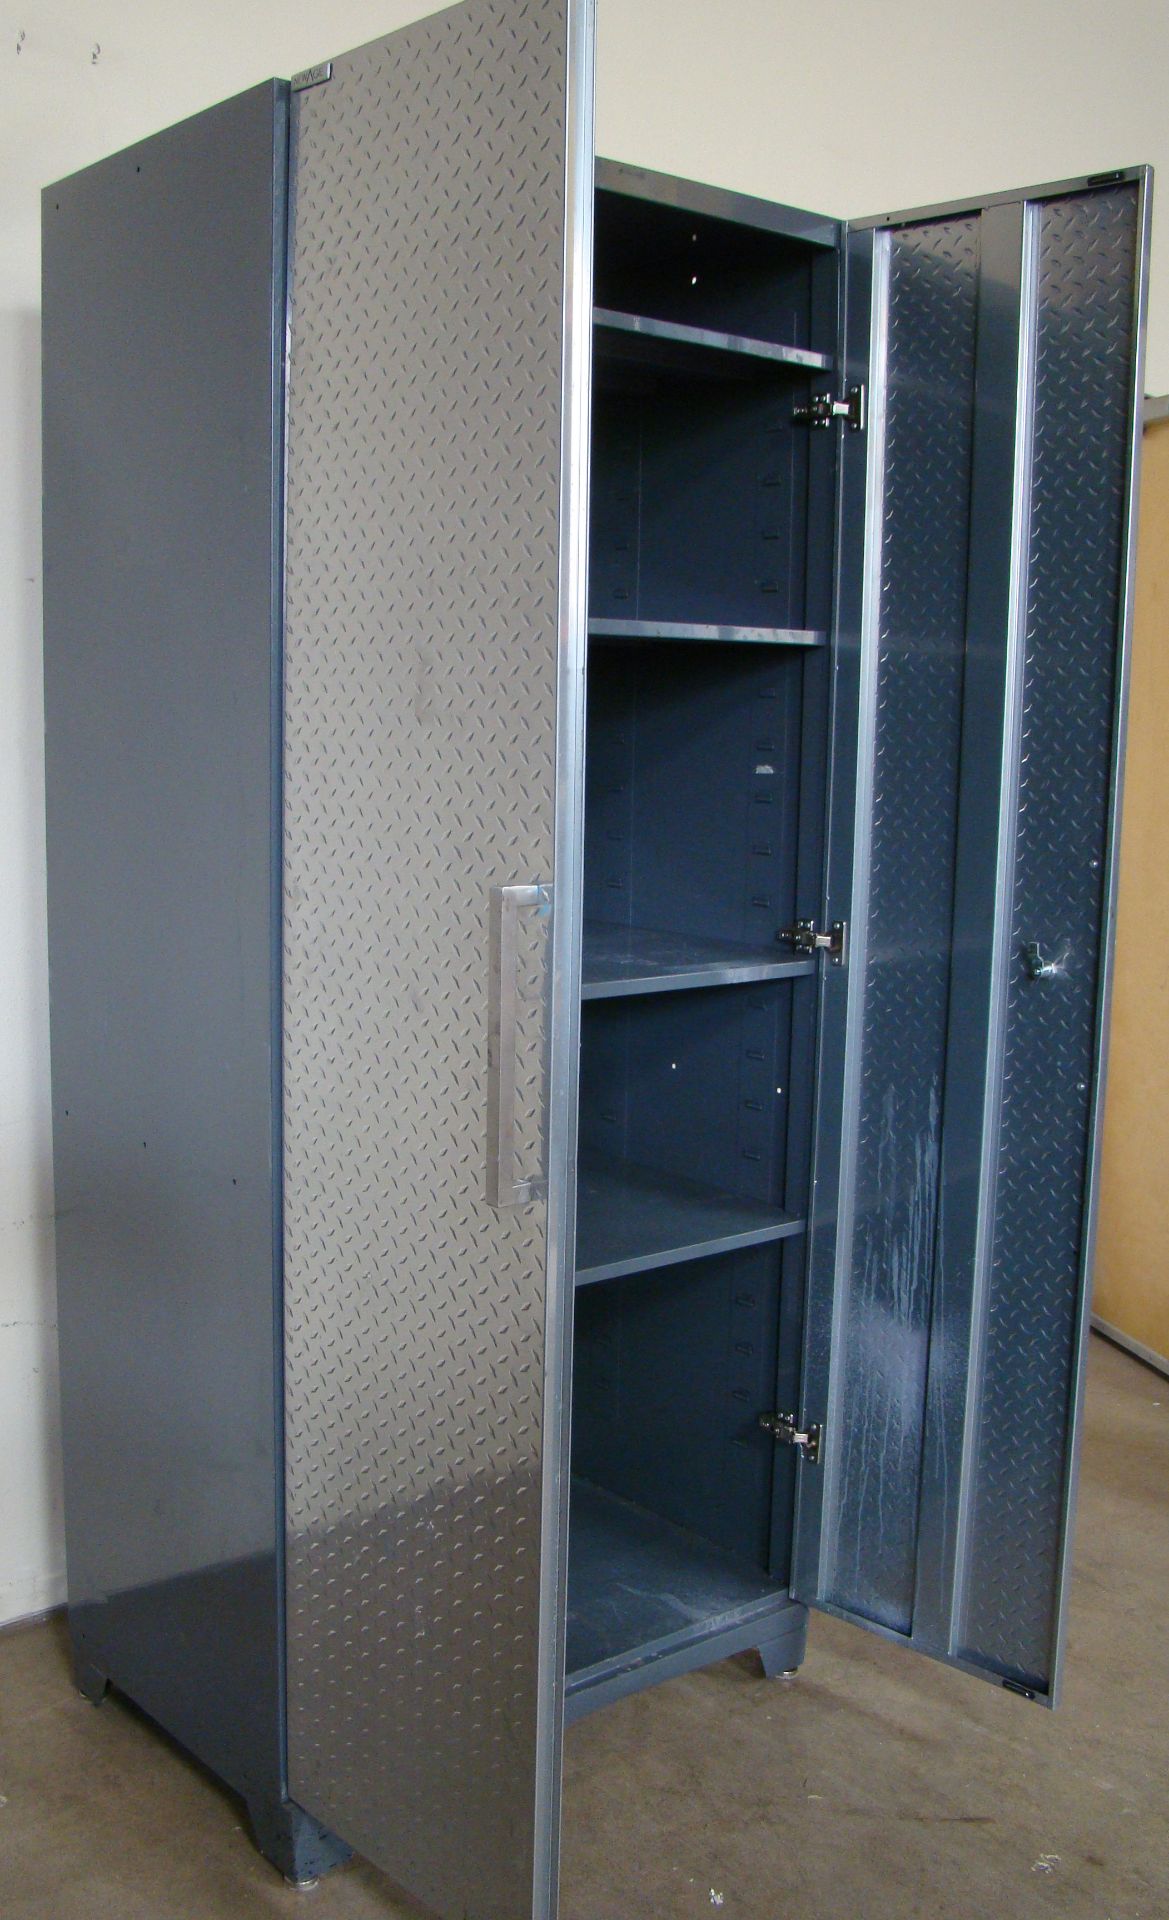 New Age Storage Cabinet 83"h x 36"w x 24"d - Image 4 of 5